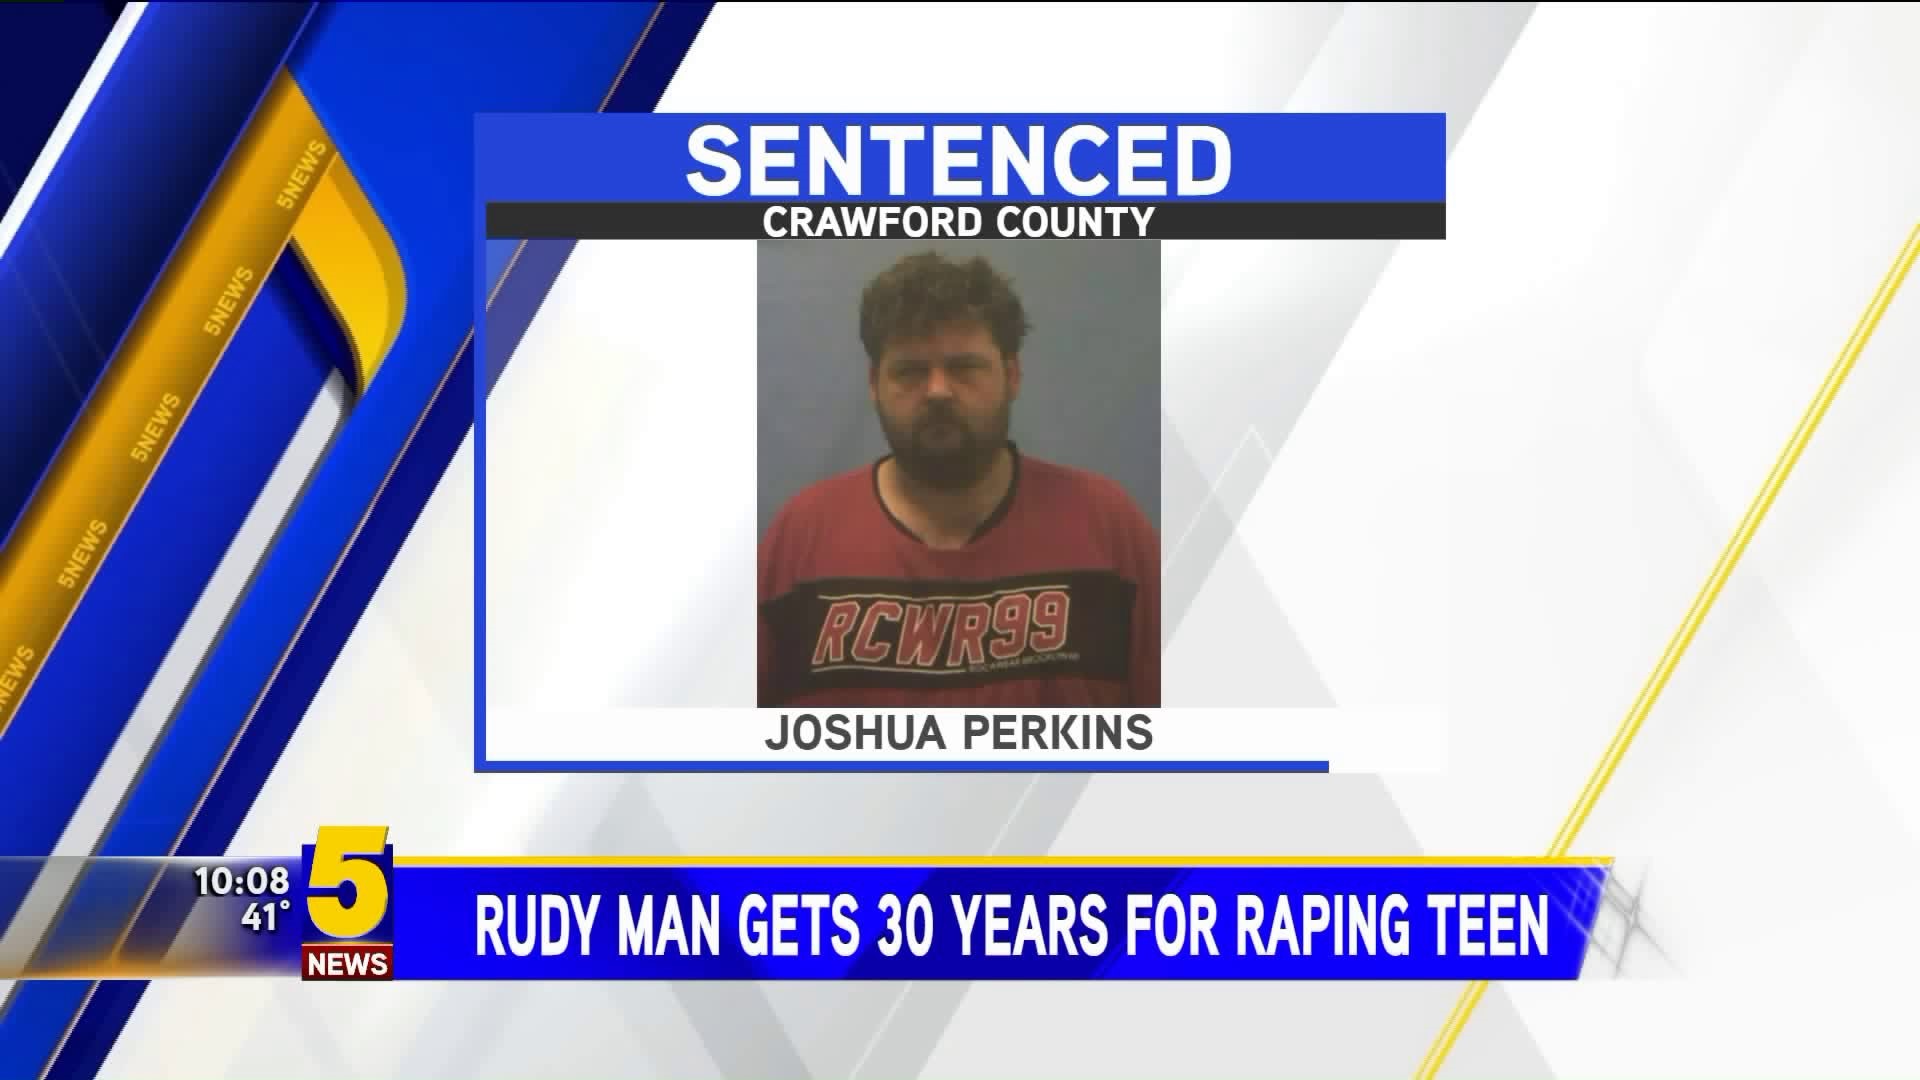 Rudy Man Get 30 Years For Raping Teen